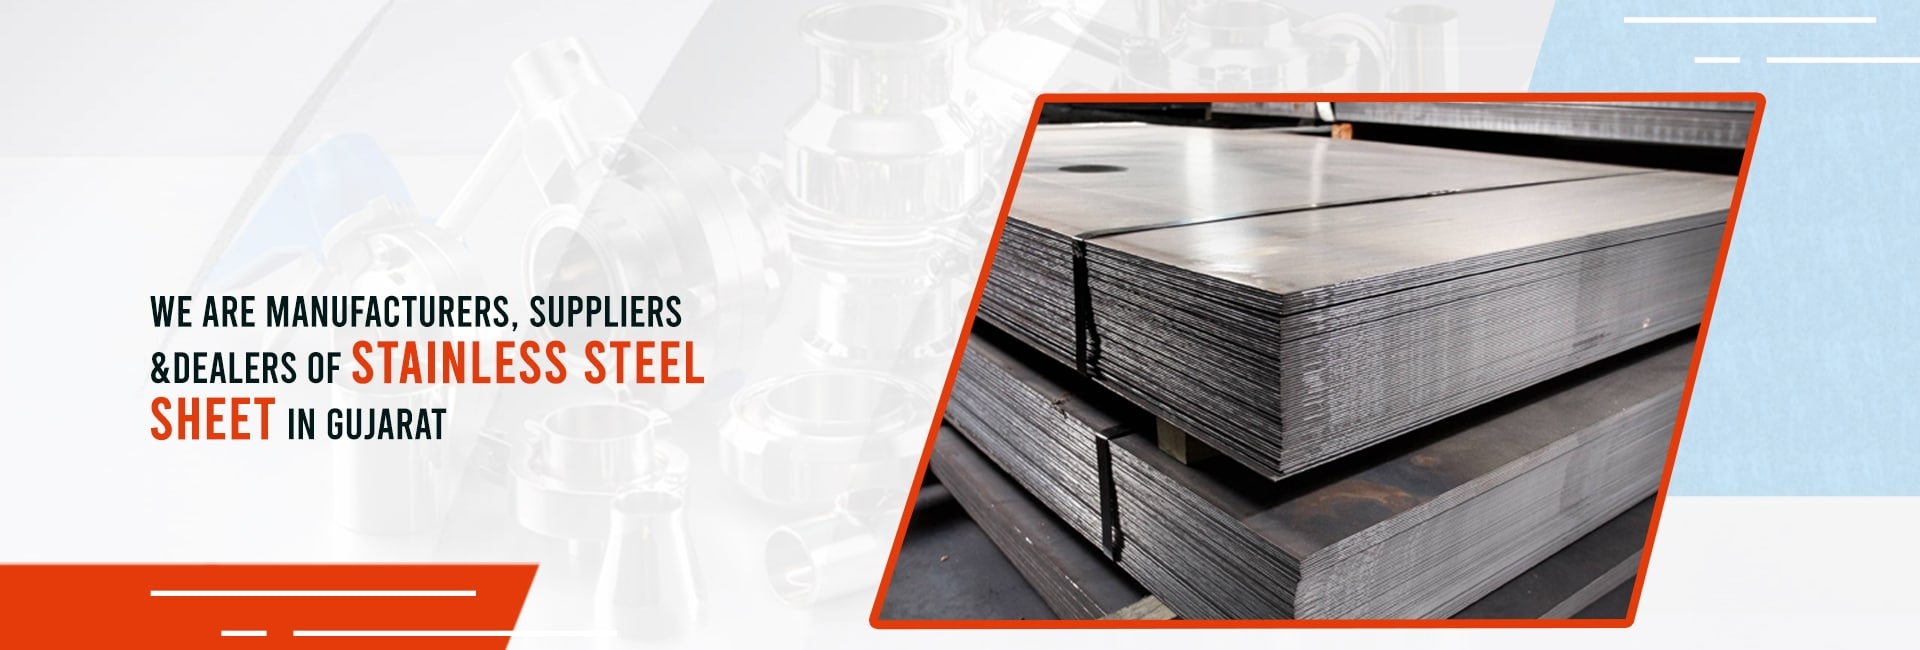 We are best quality and affordable price Manufacturer, Supplier & Dealer of Stainless Steel Sheet in Ahmedabad, Gujarat, India